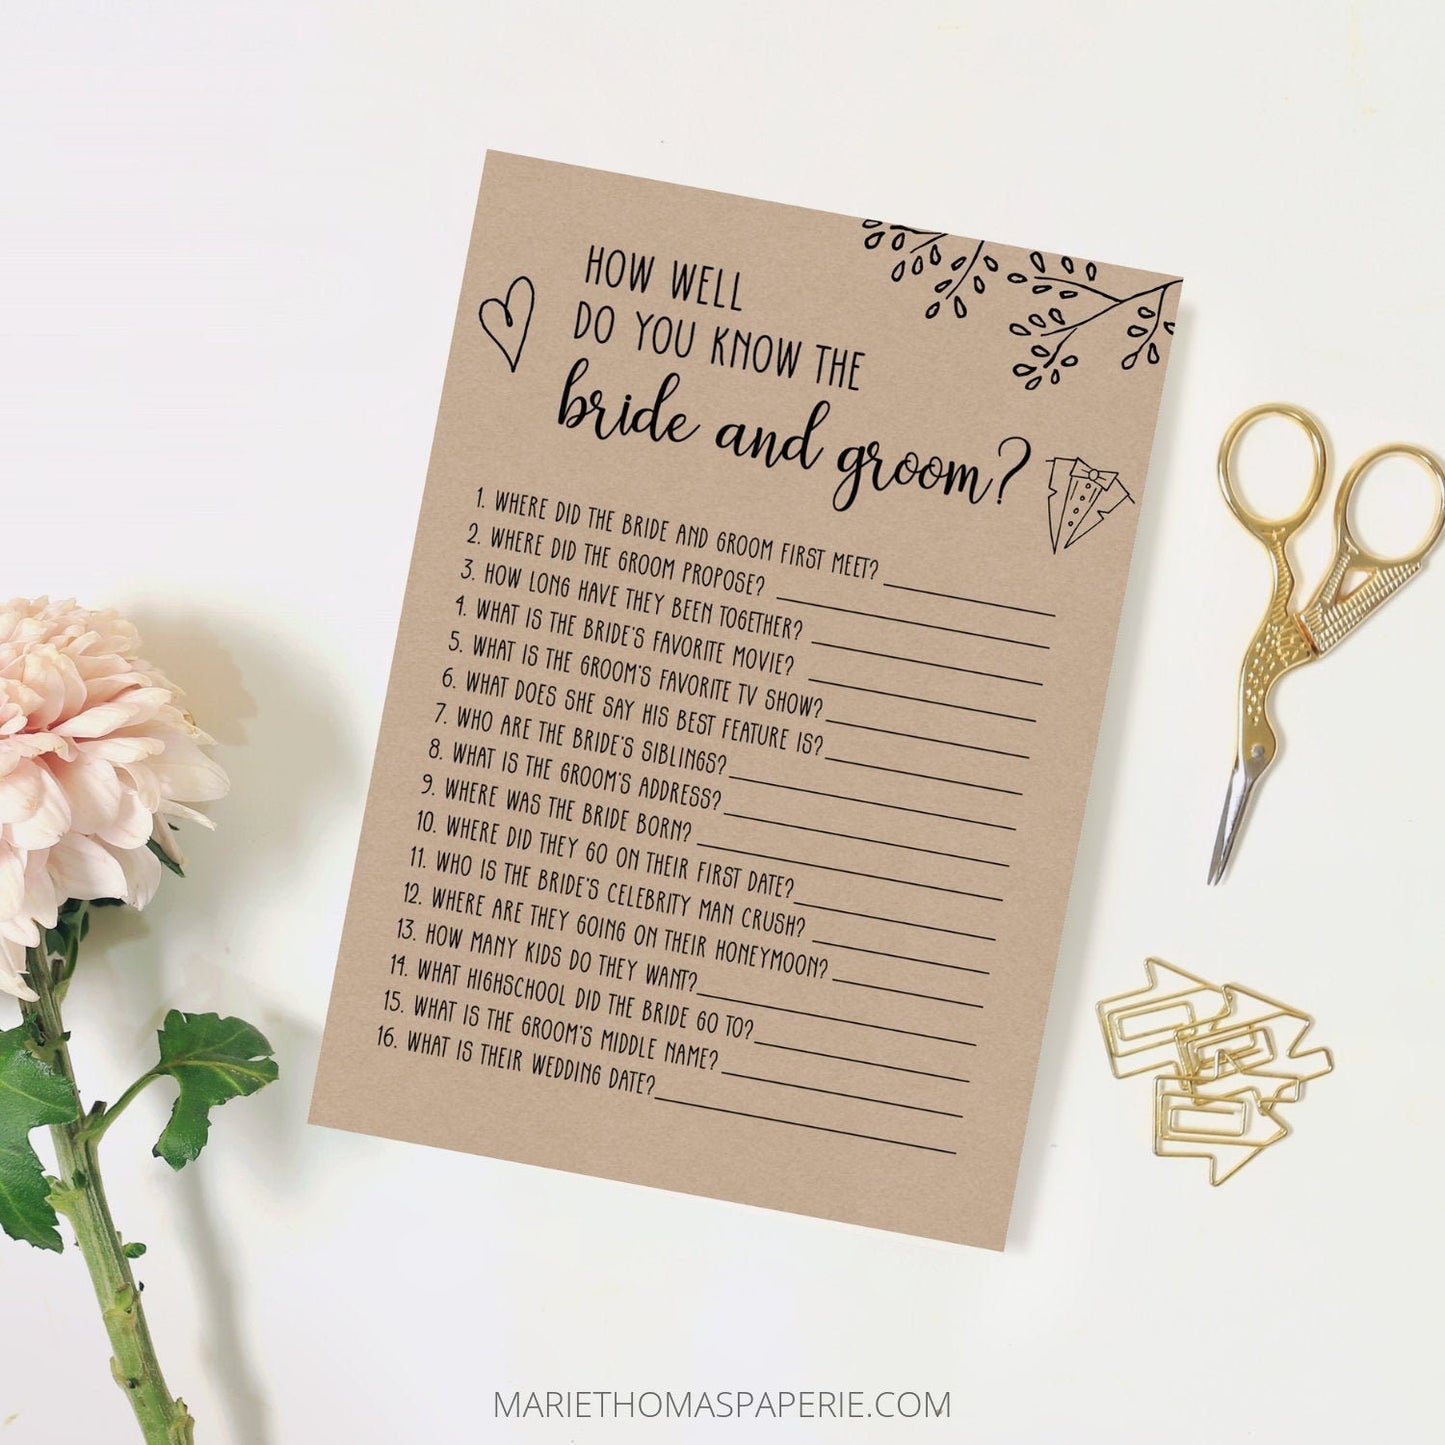 Editable How Well Do You Know the Bride and Groom Bridal Shower Games Rustic Kraft Paper + Virtual Template